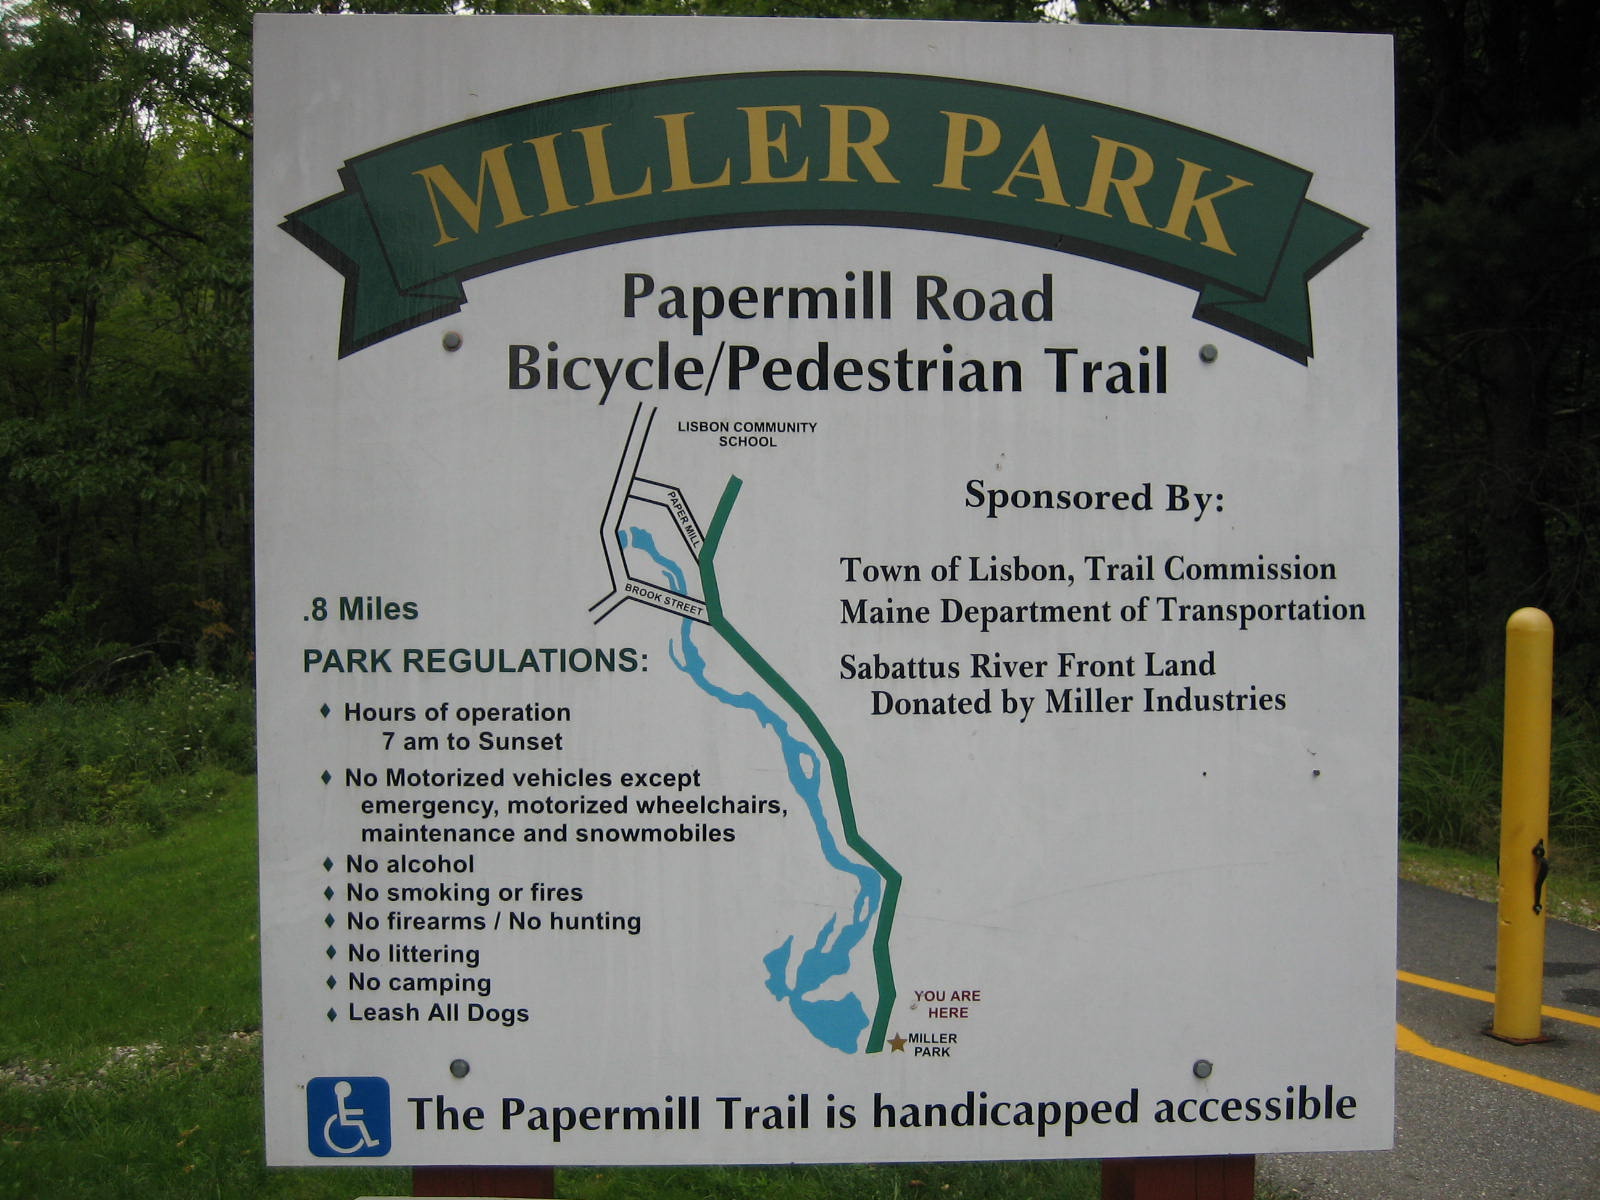 Miller Park Papermill Trail